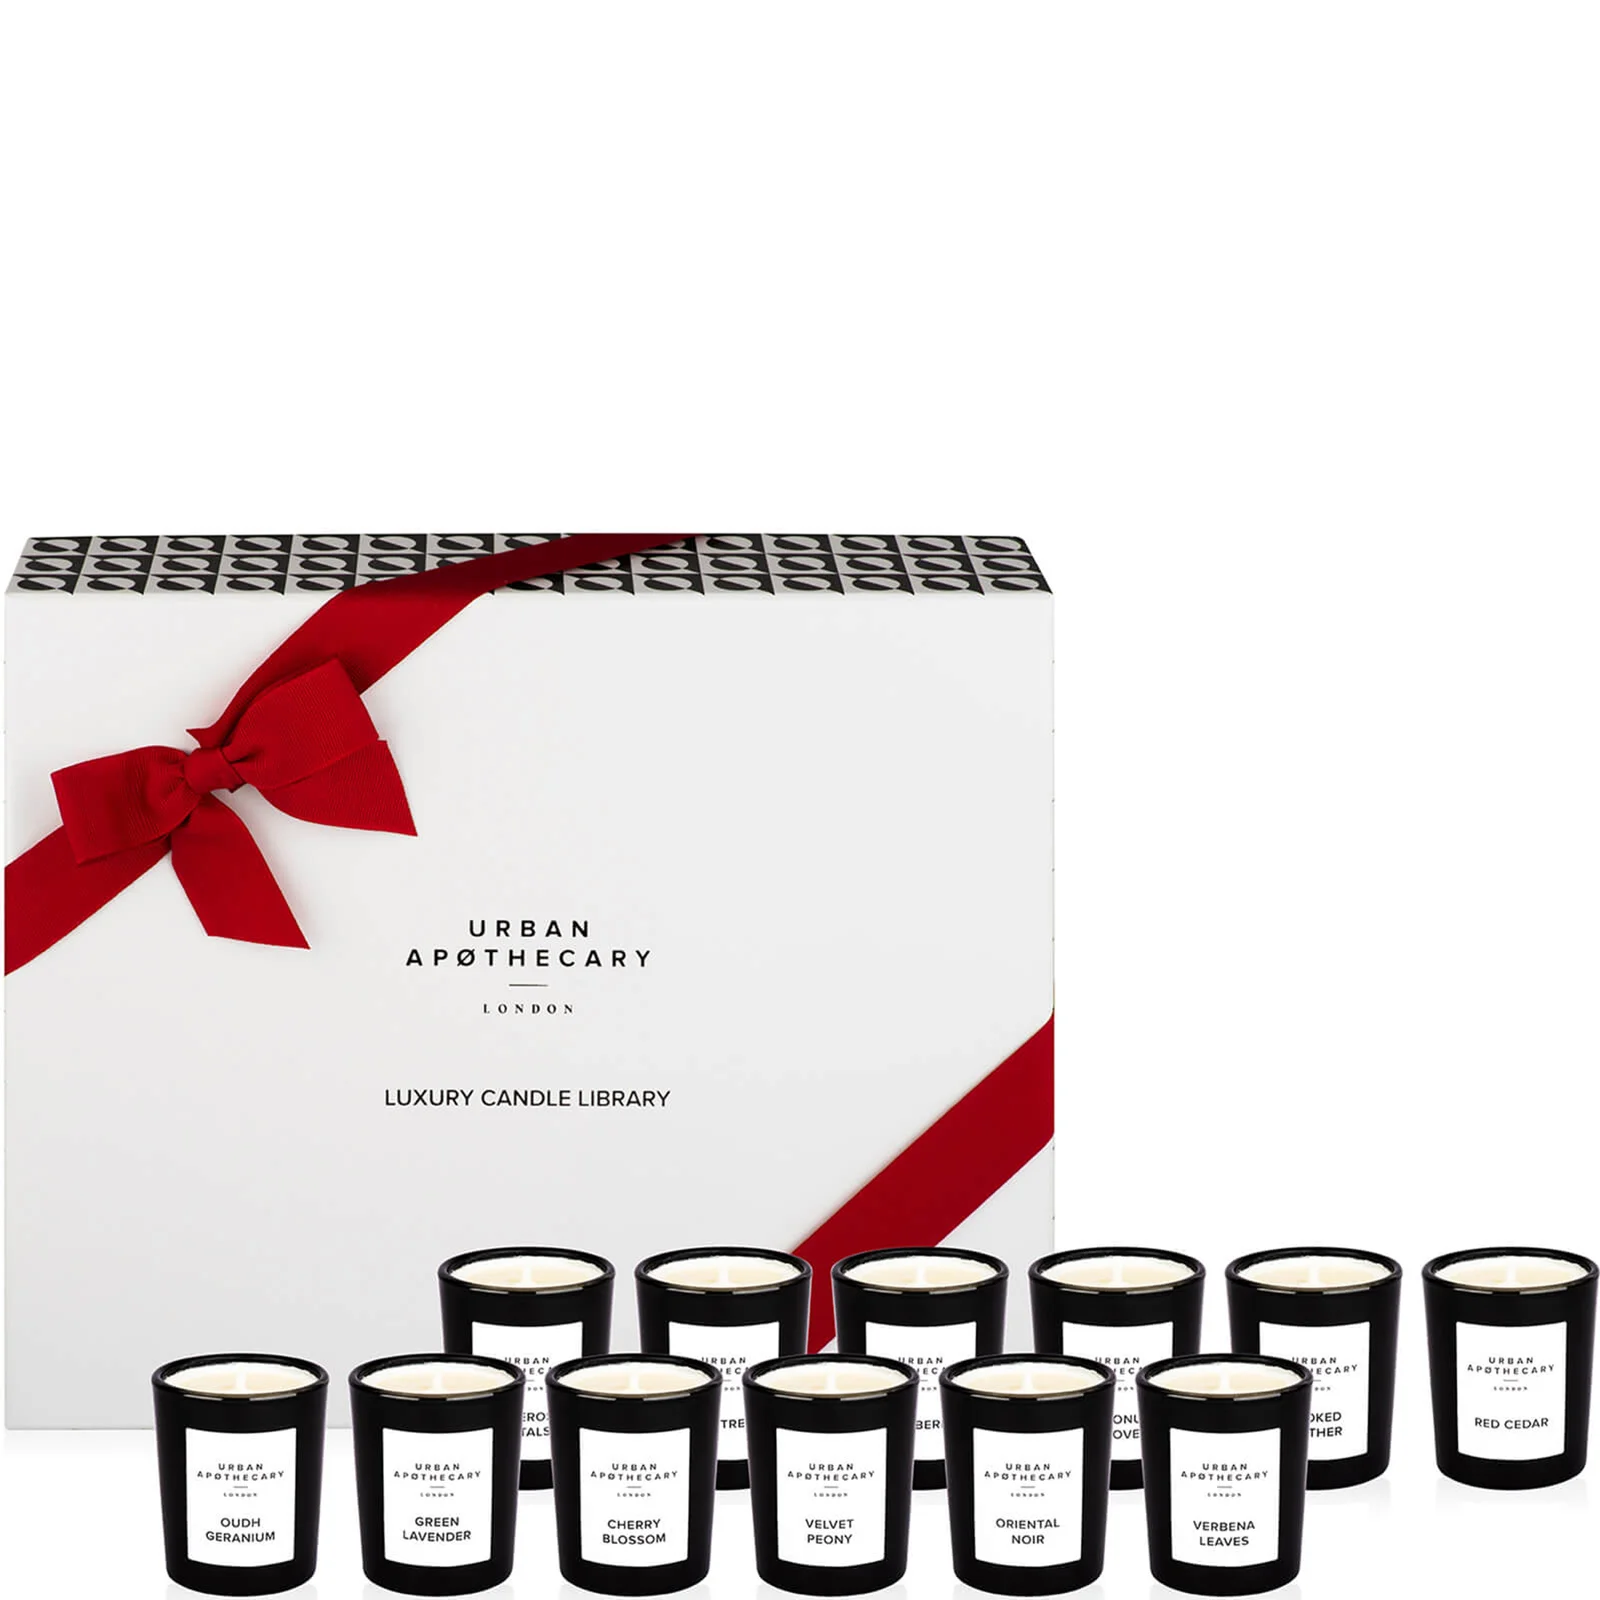 Urban Apothecary 12 Piece Luxury Candle Library 35g Image 1